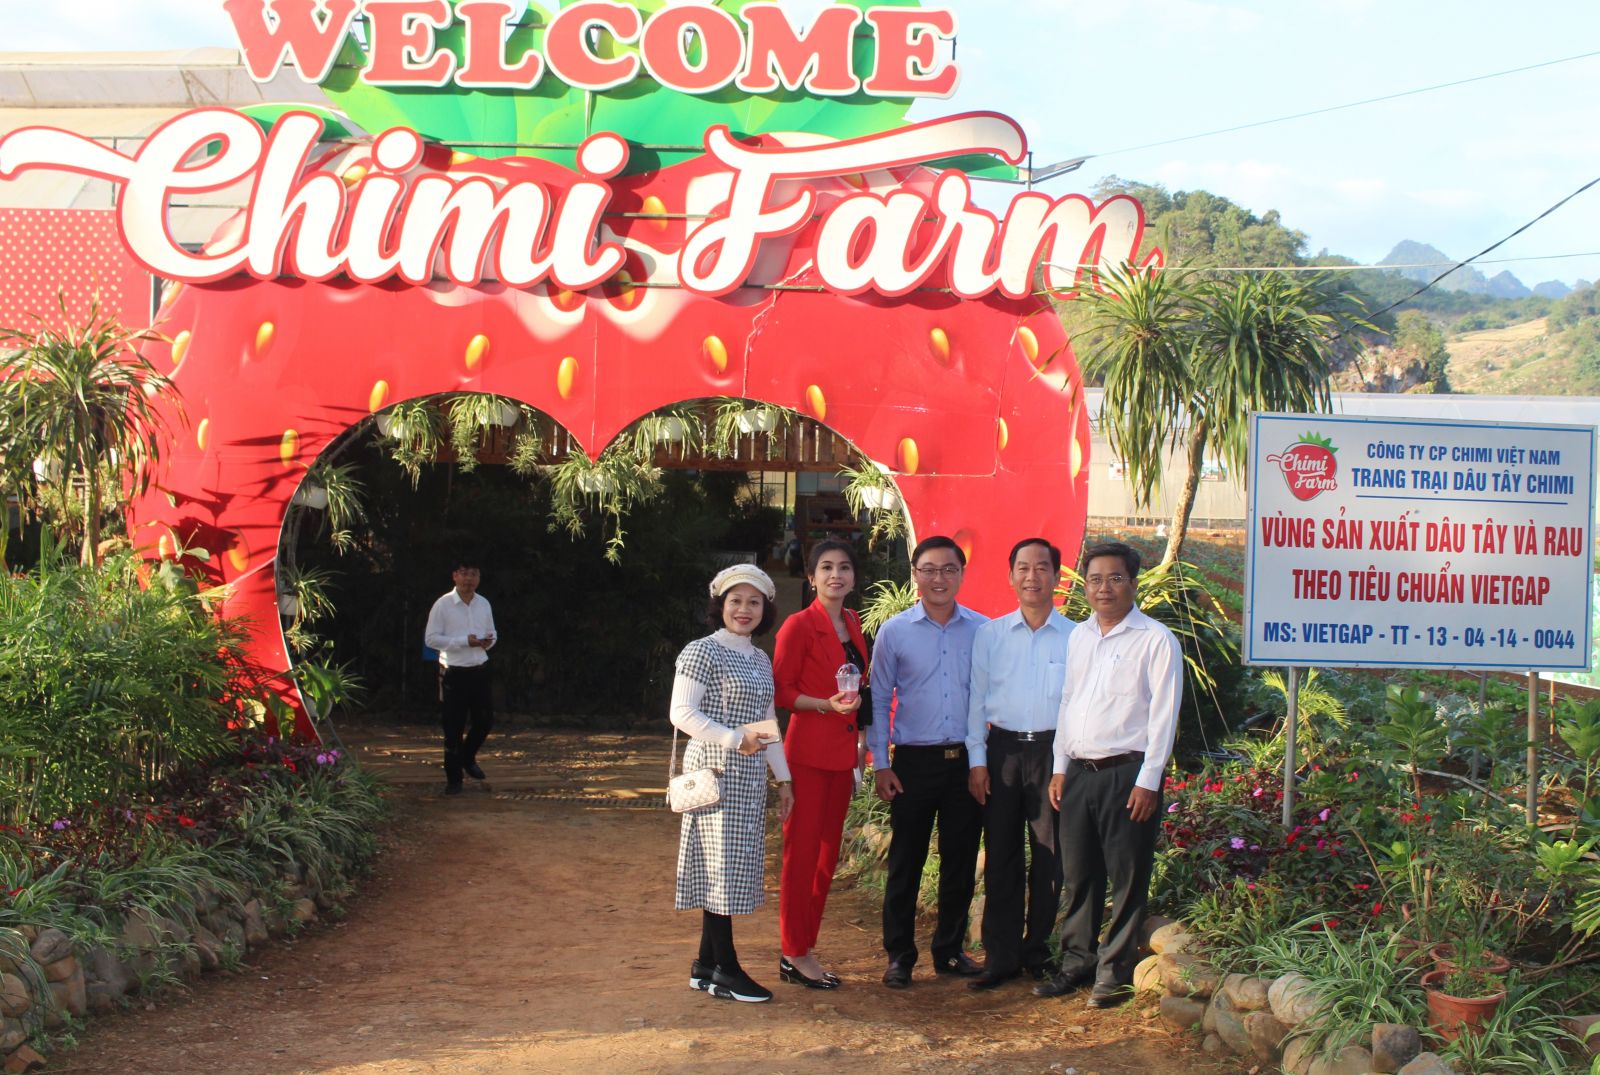 The mission visits Chimi strawberry farm